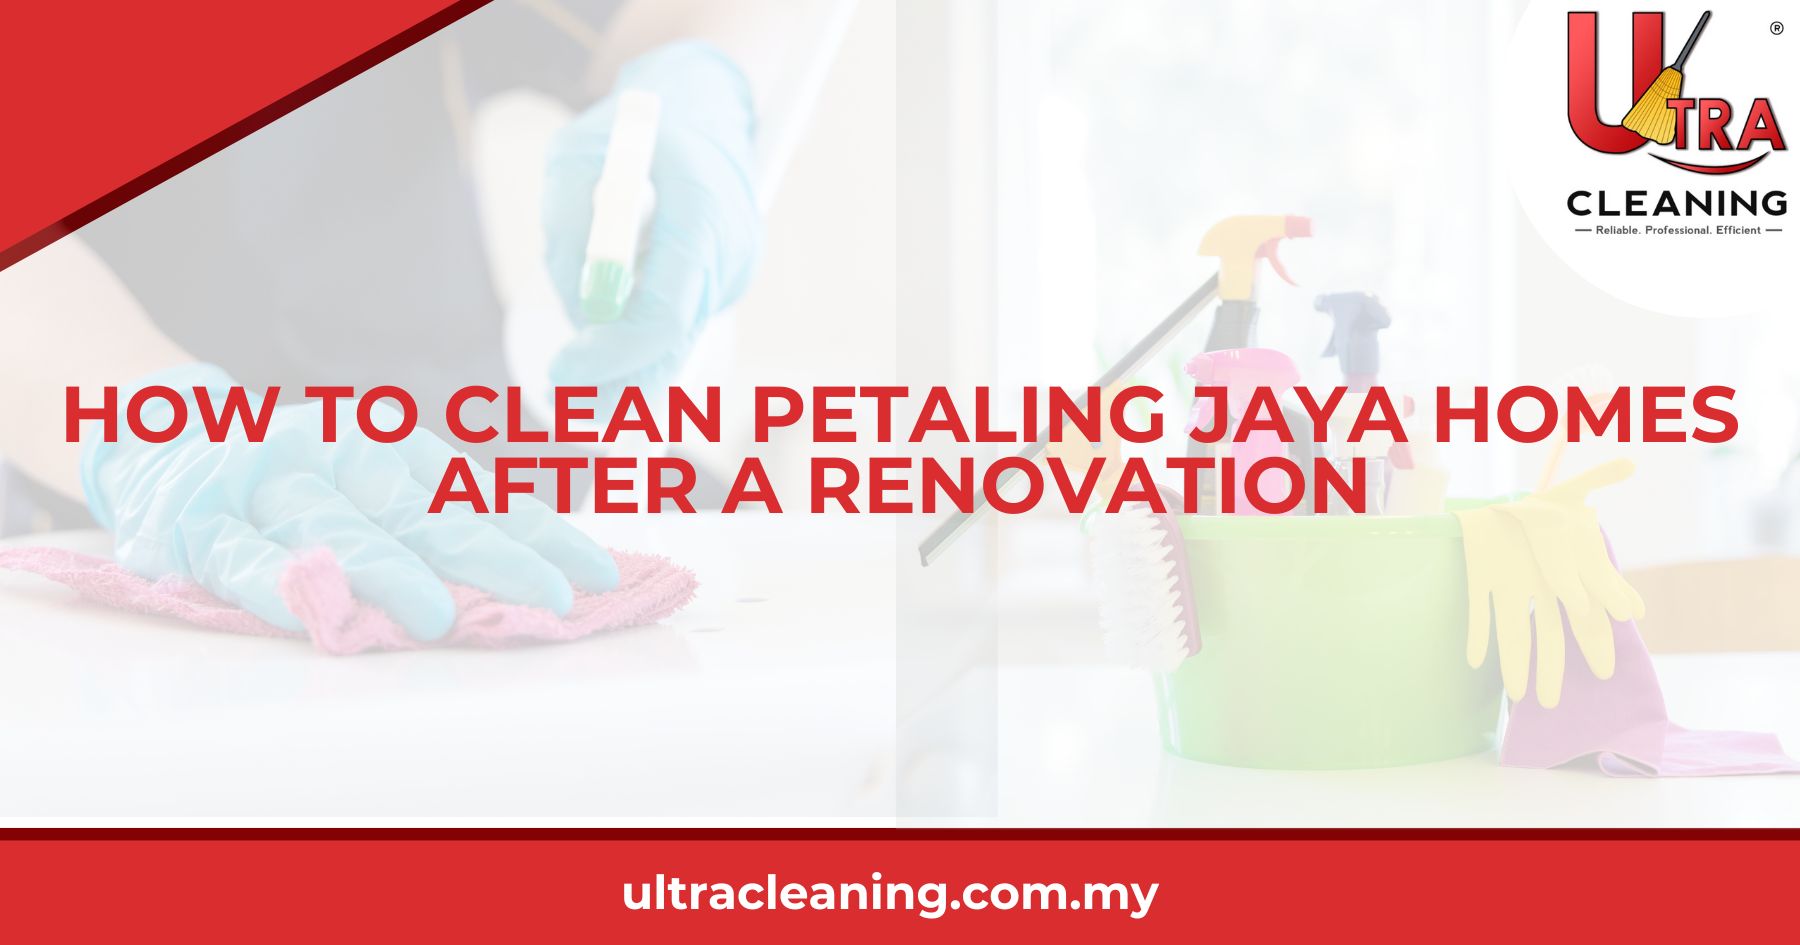 How to Clean Petaling Jaya Homes After a Renovation